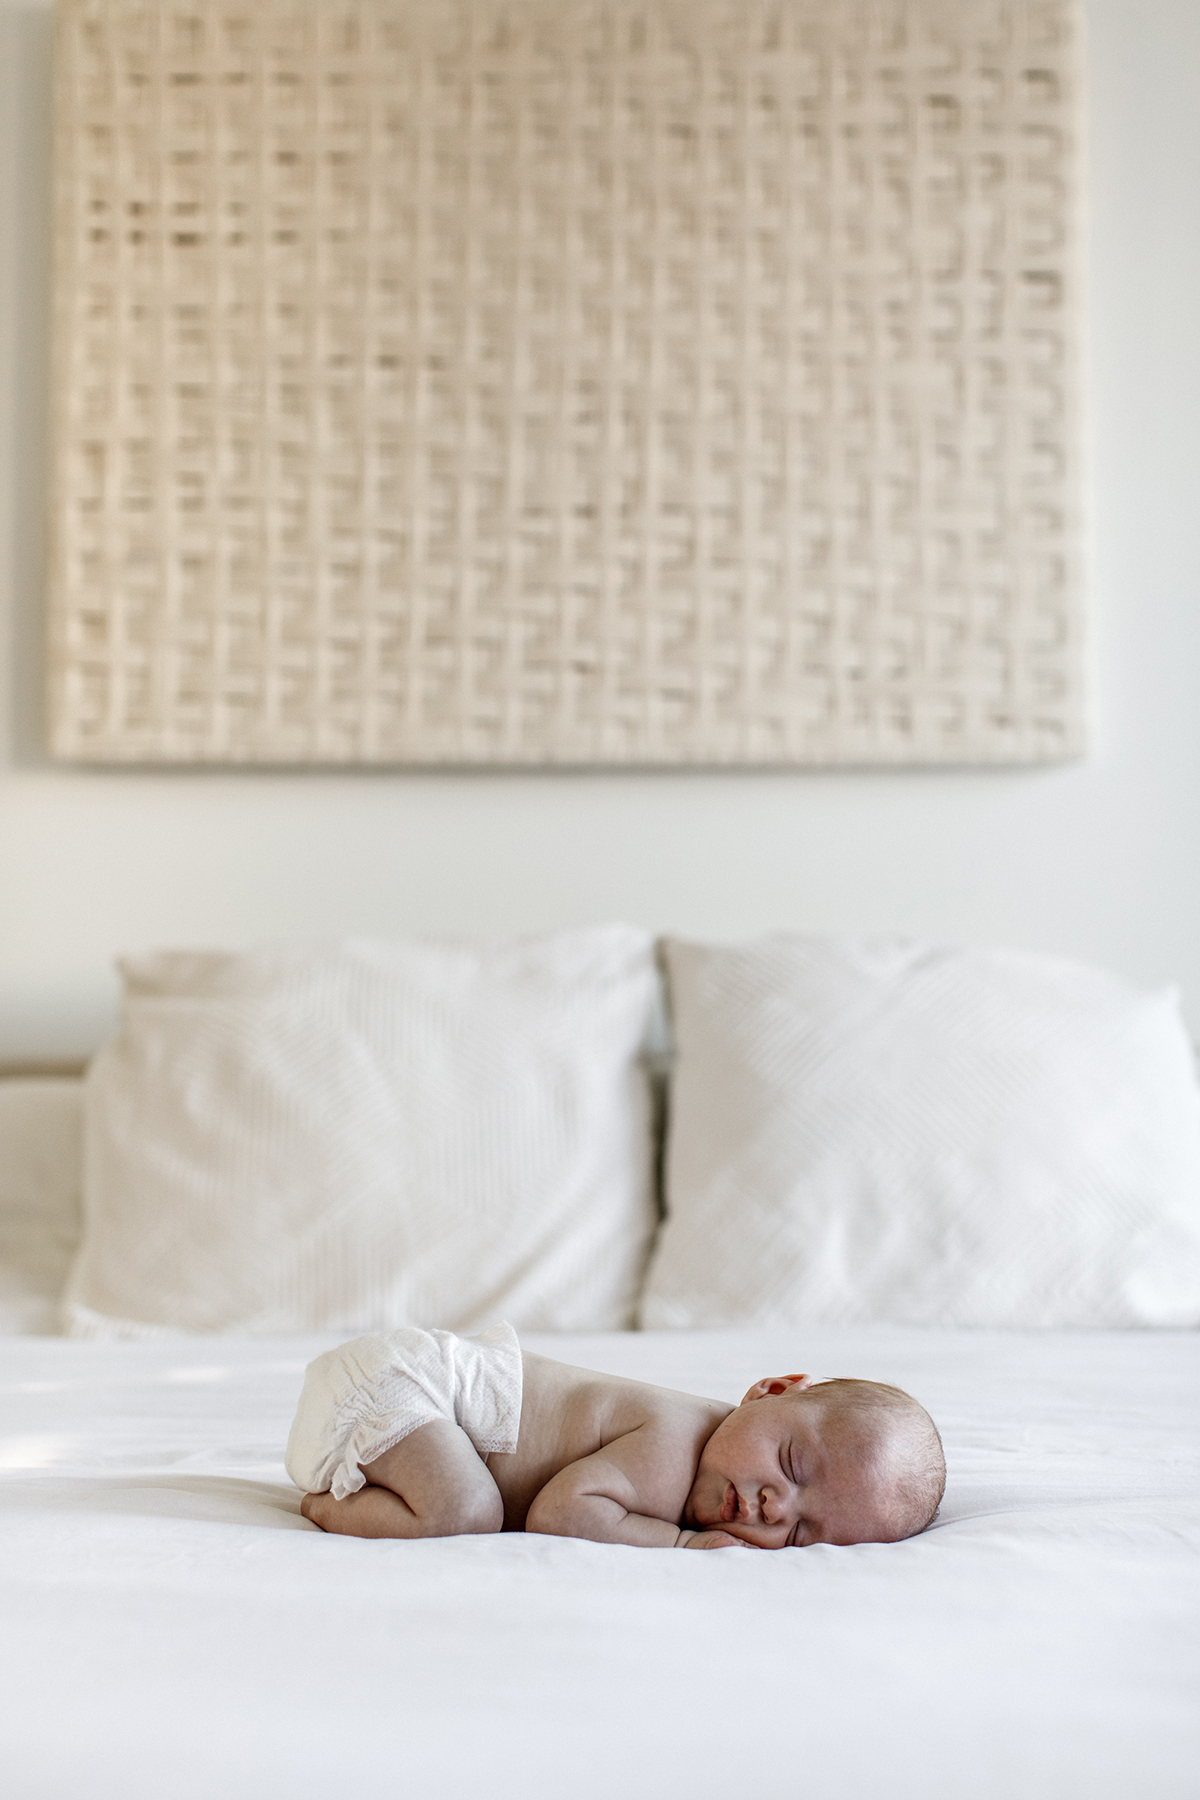 long shot of peacefully sleeping baby in bed